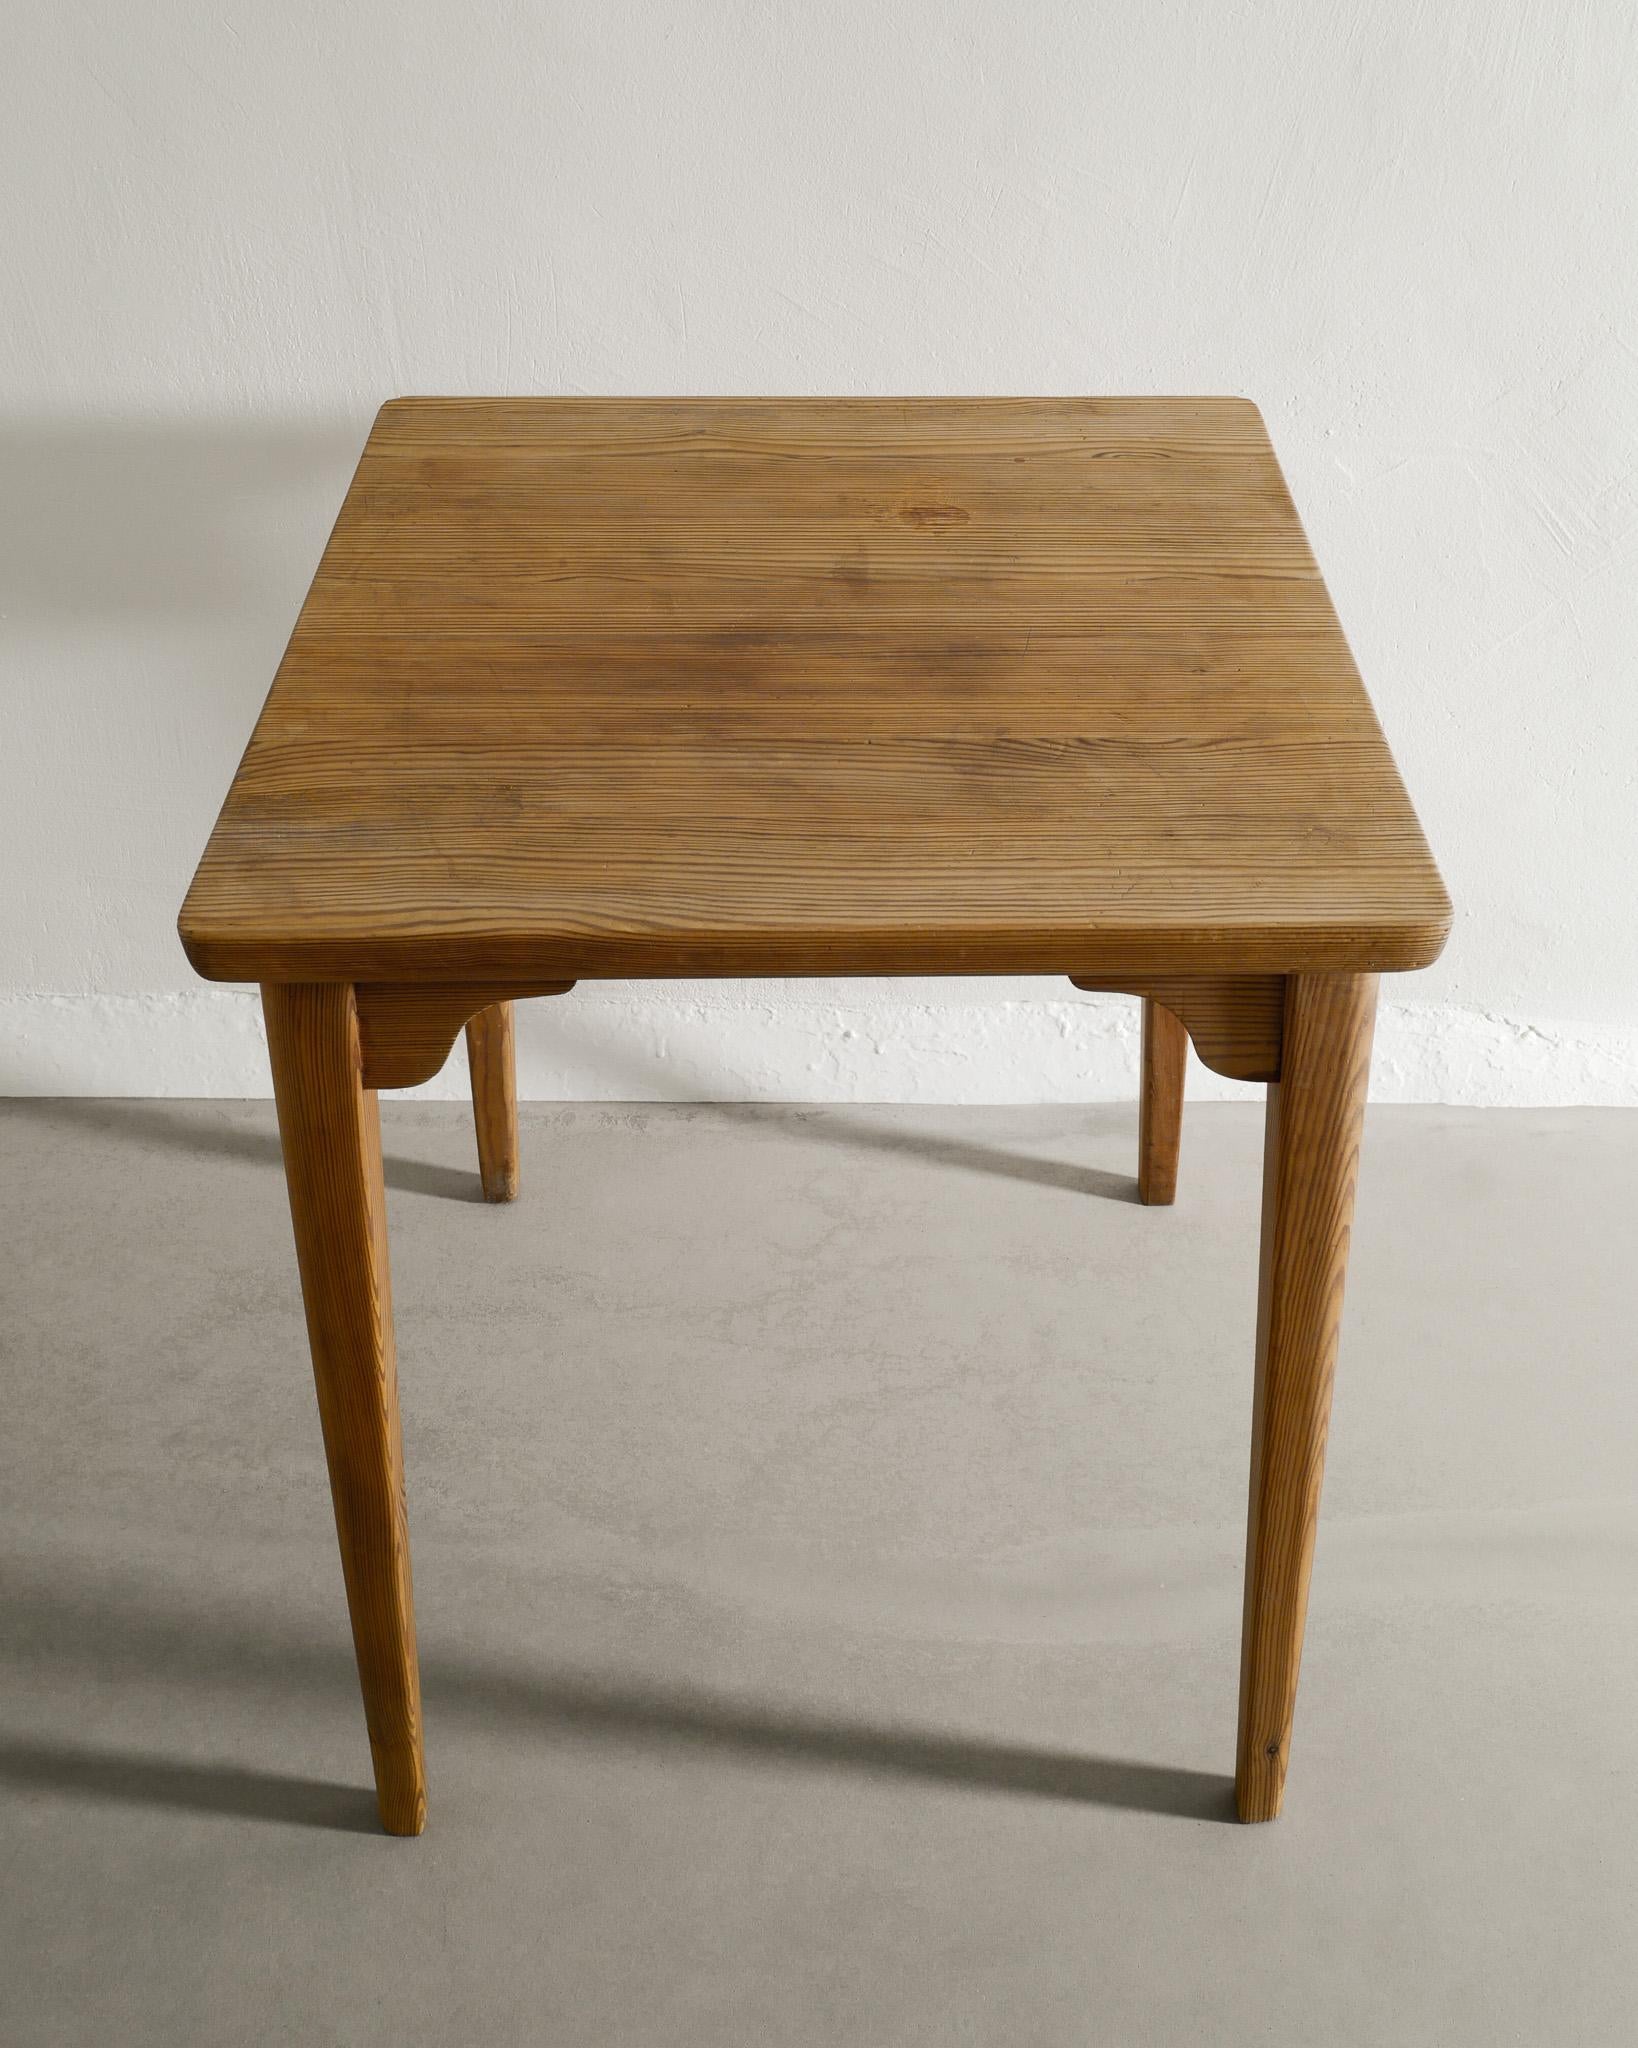 Swedish Wooden Side Dining Table in Pine Produced by Nordiska Kompaniet, 1940s For Sale 1